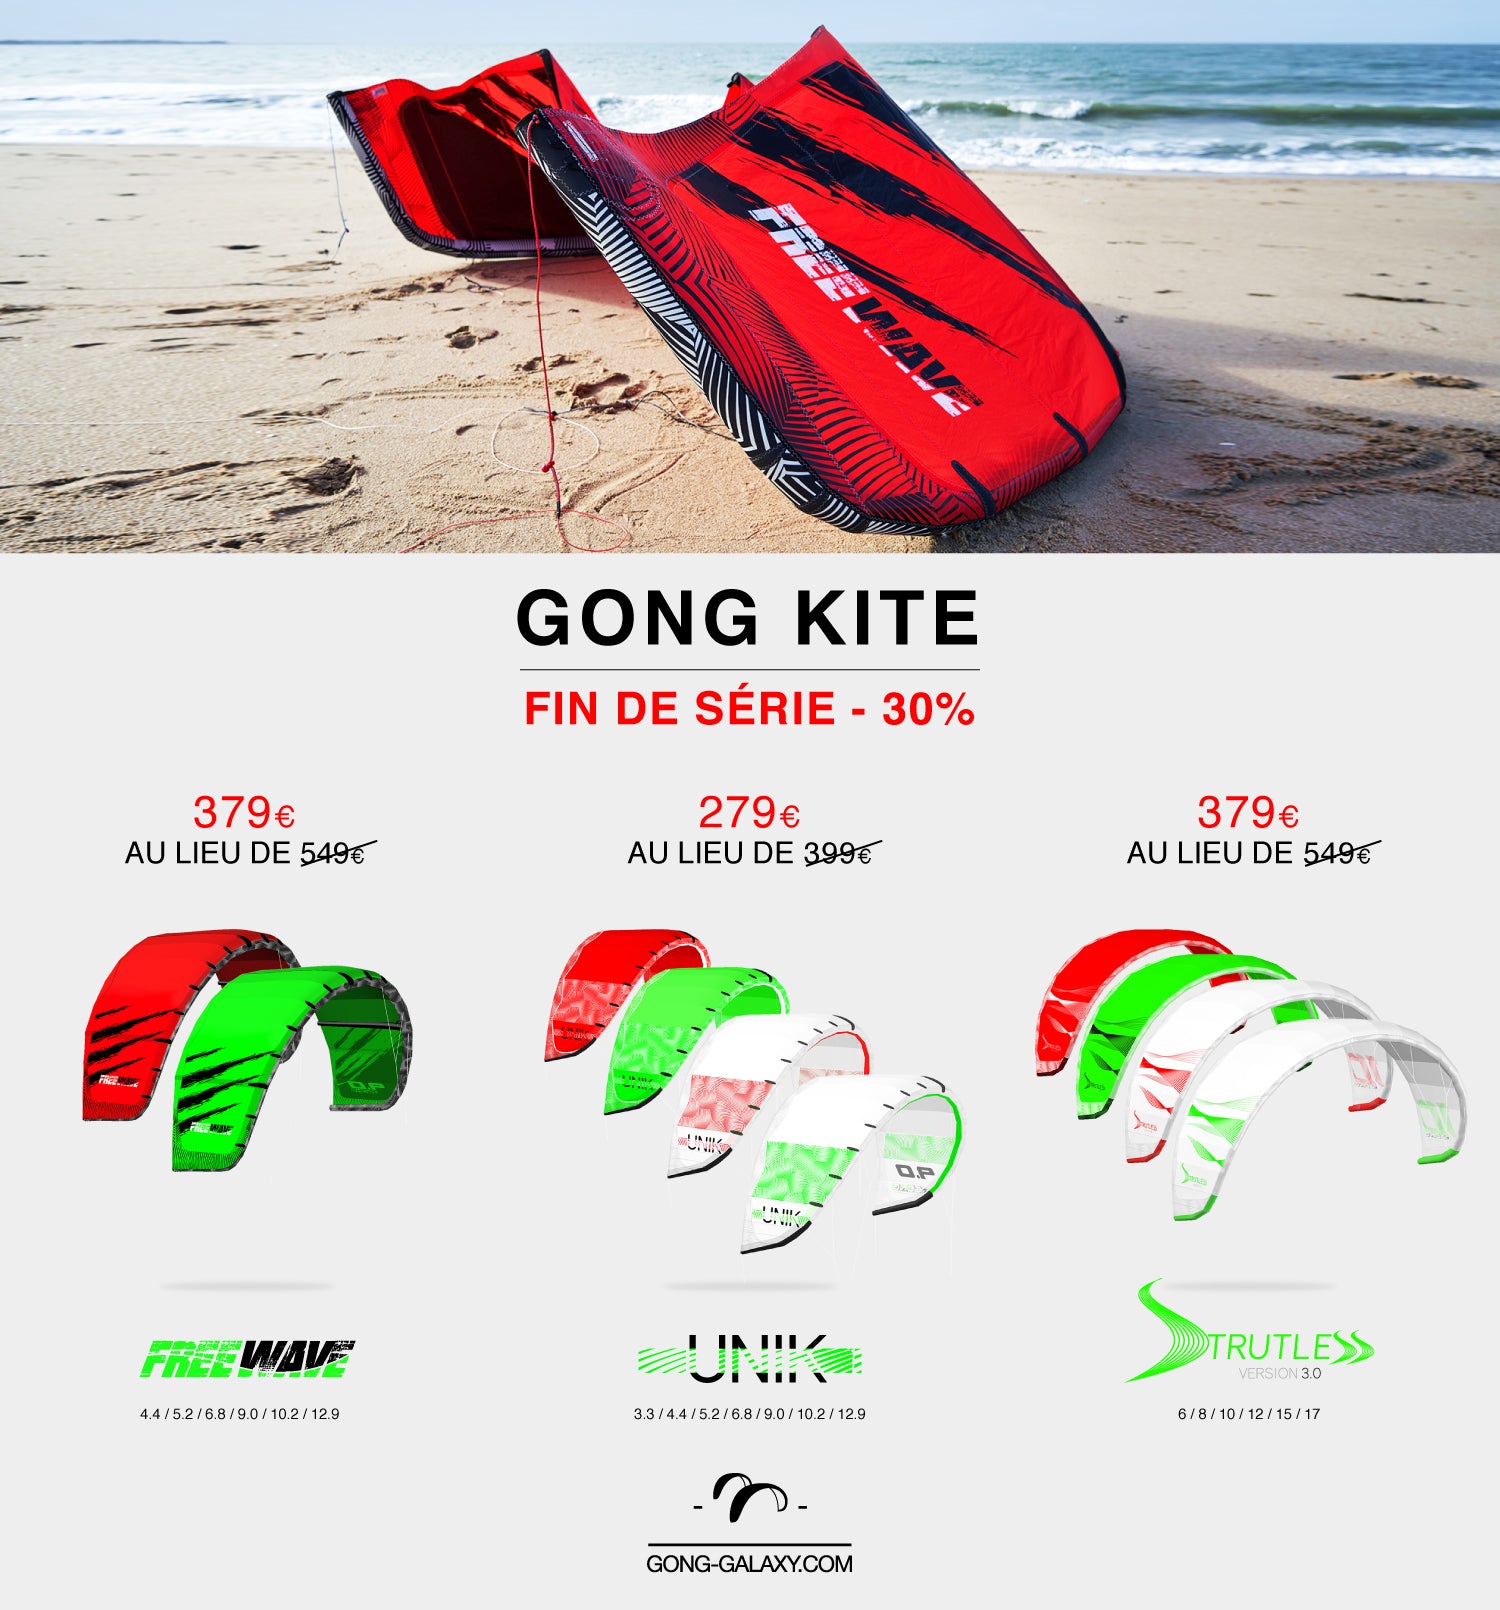 SHOP : 30% RÉDUCTION ON GONG KITE !!!